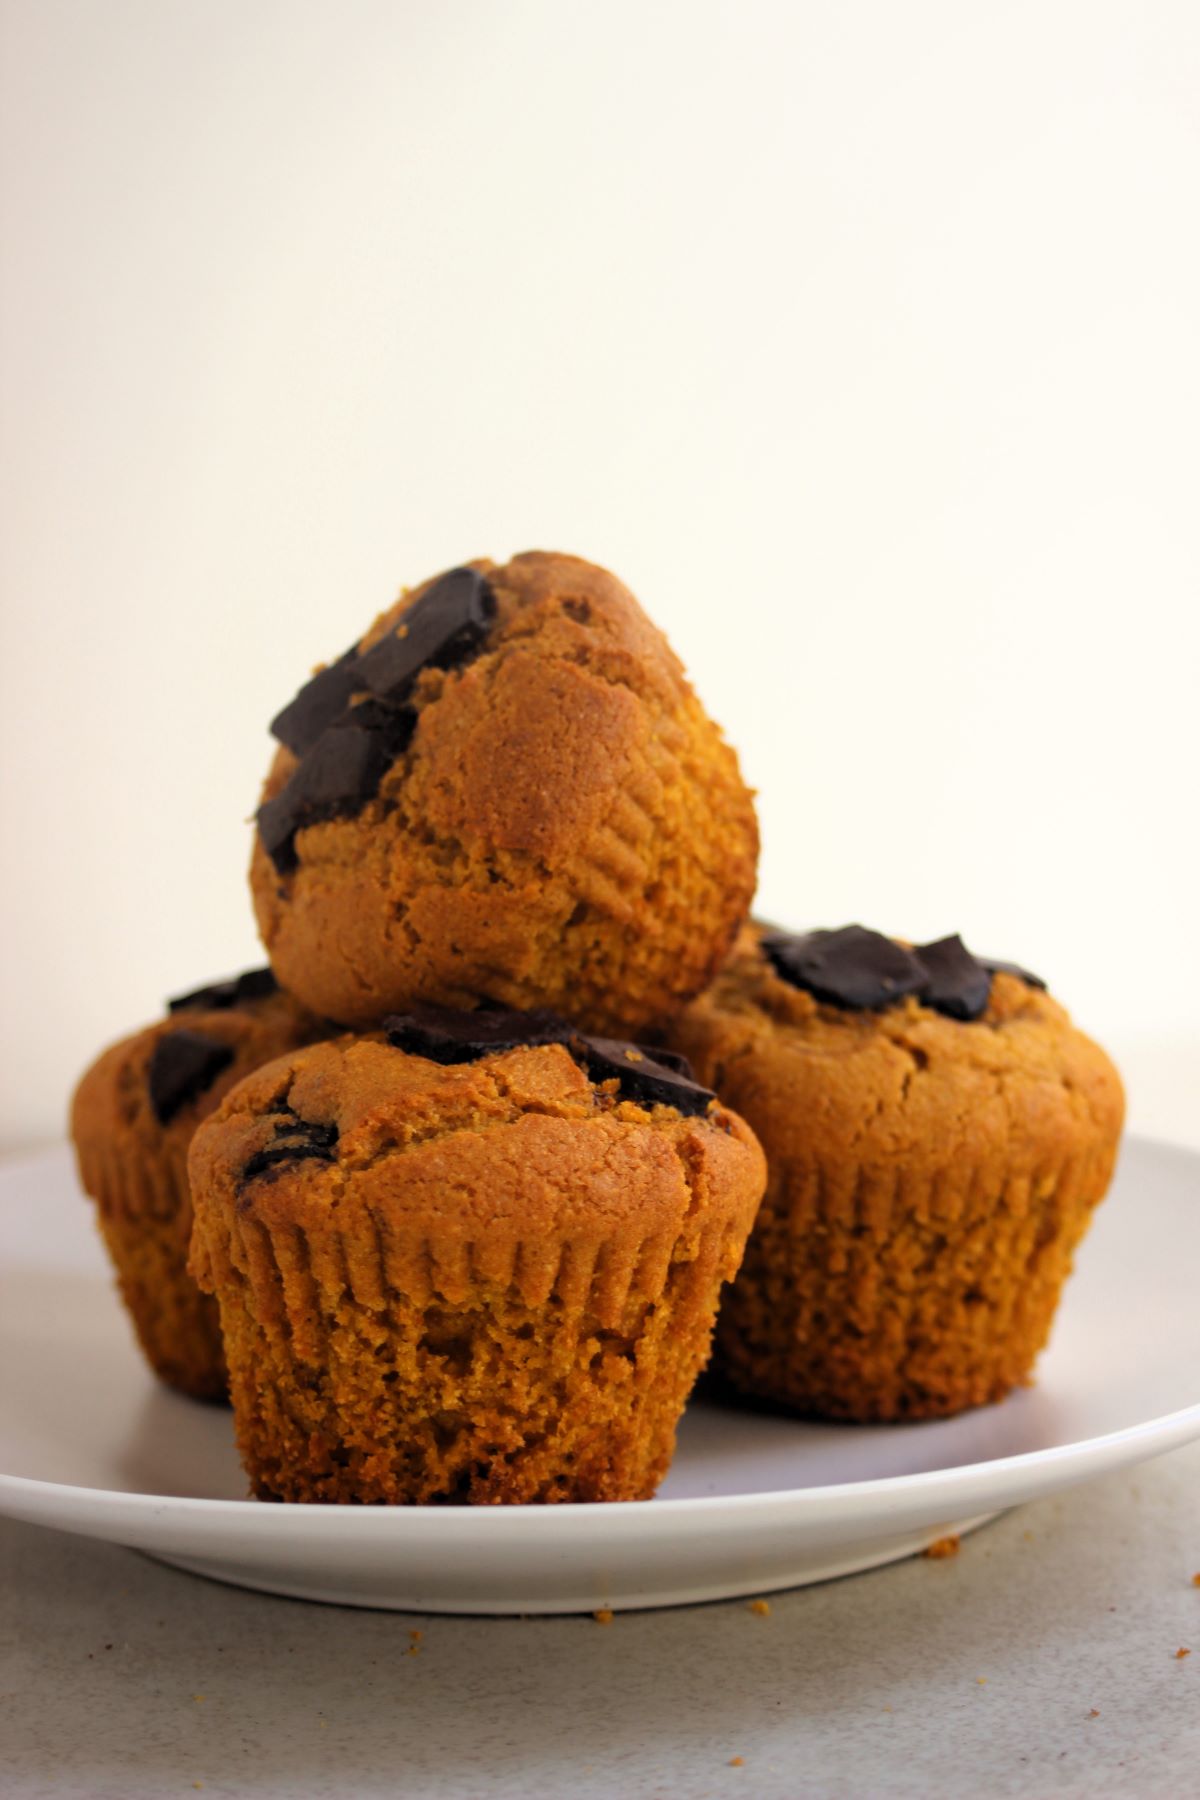 Pumpkin chocolate muffins on a white plate.